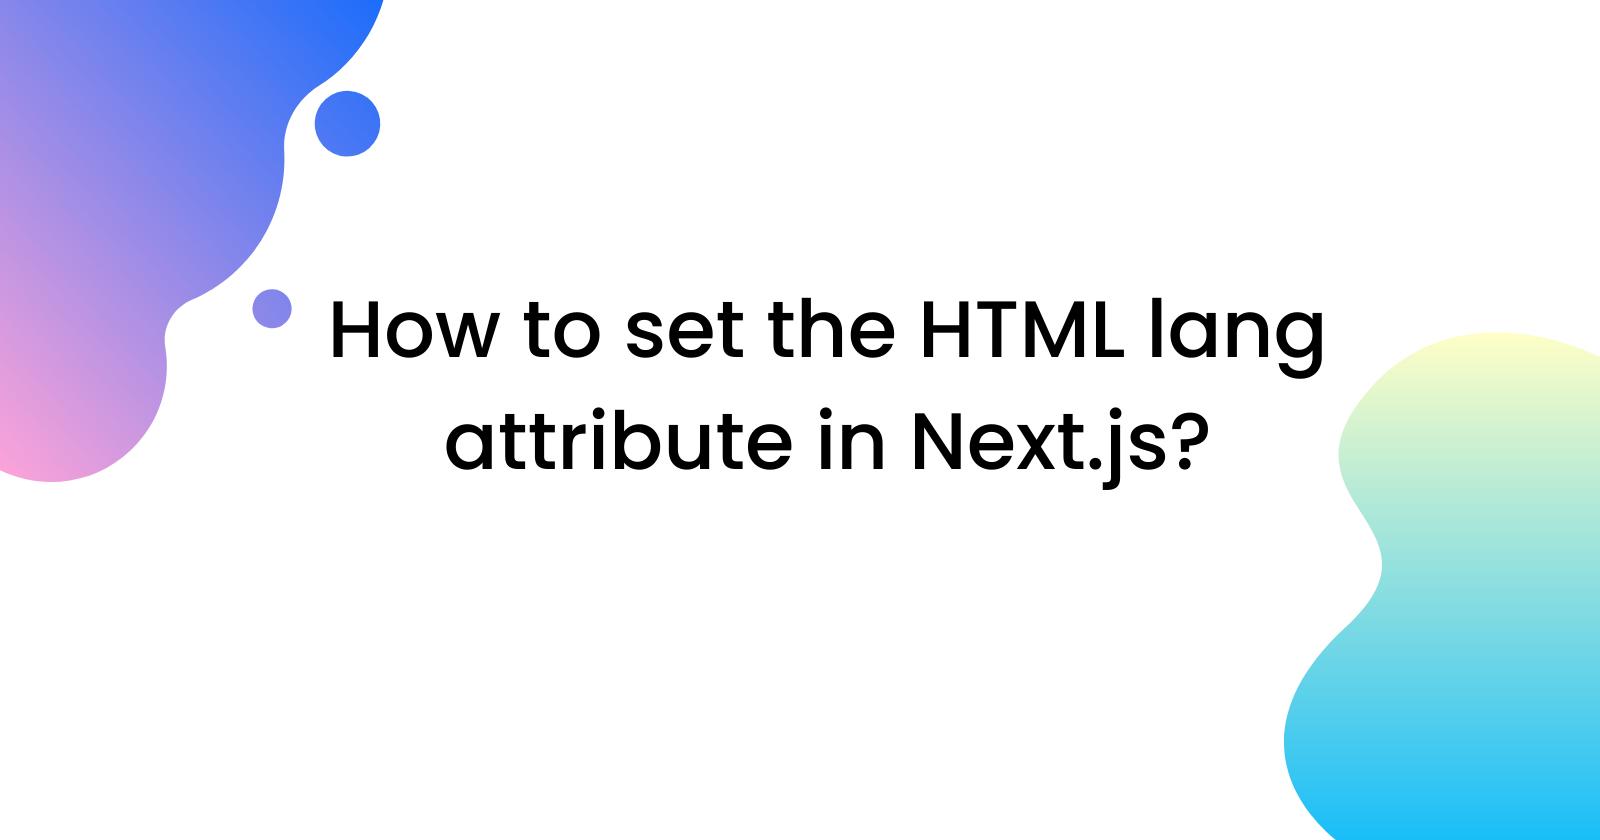 How to set the HTML lang attribute in Next.js?